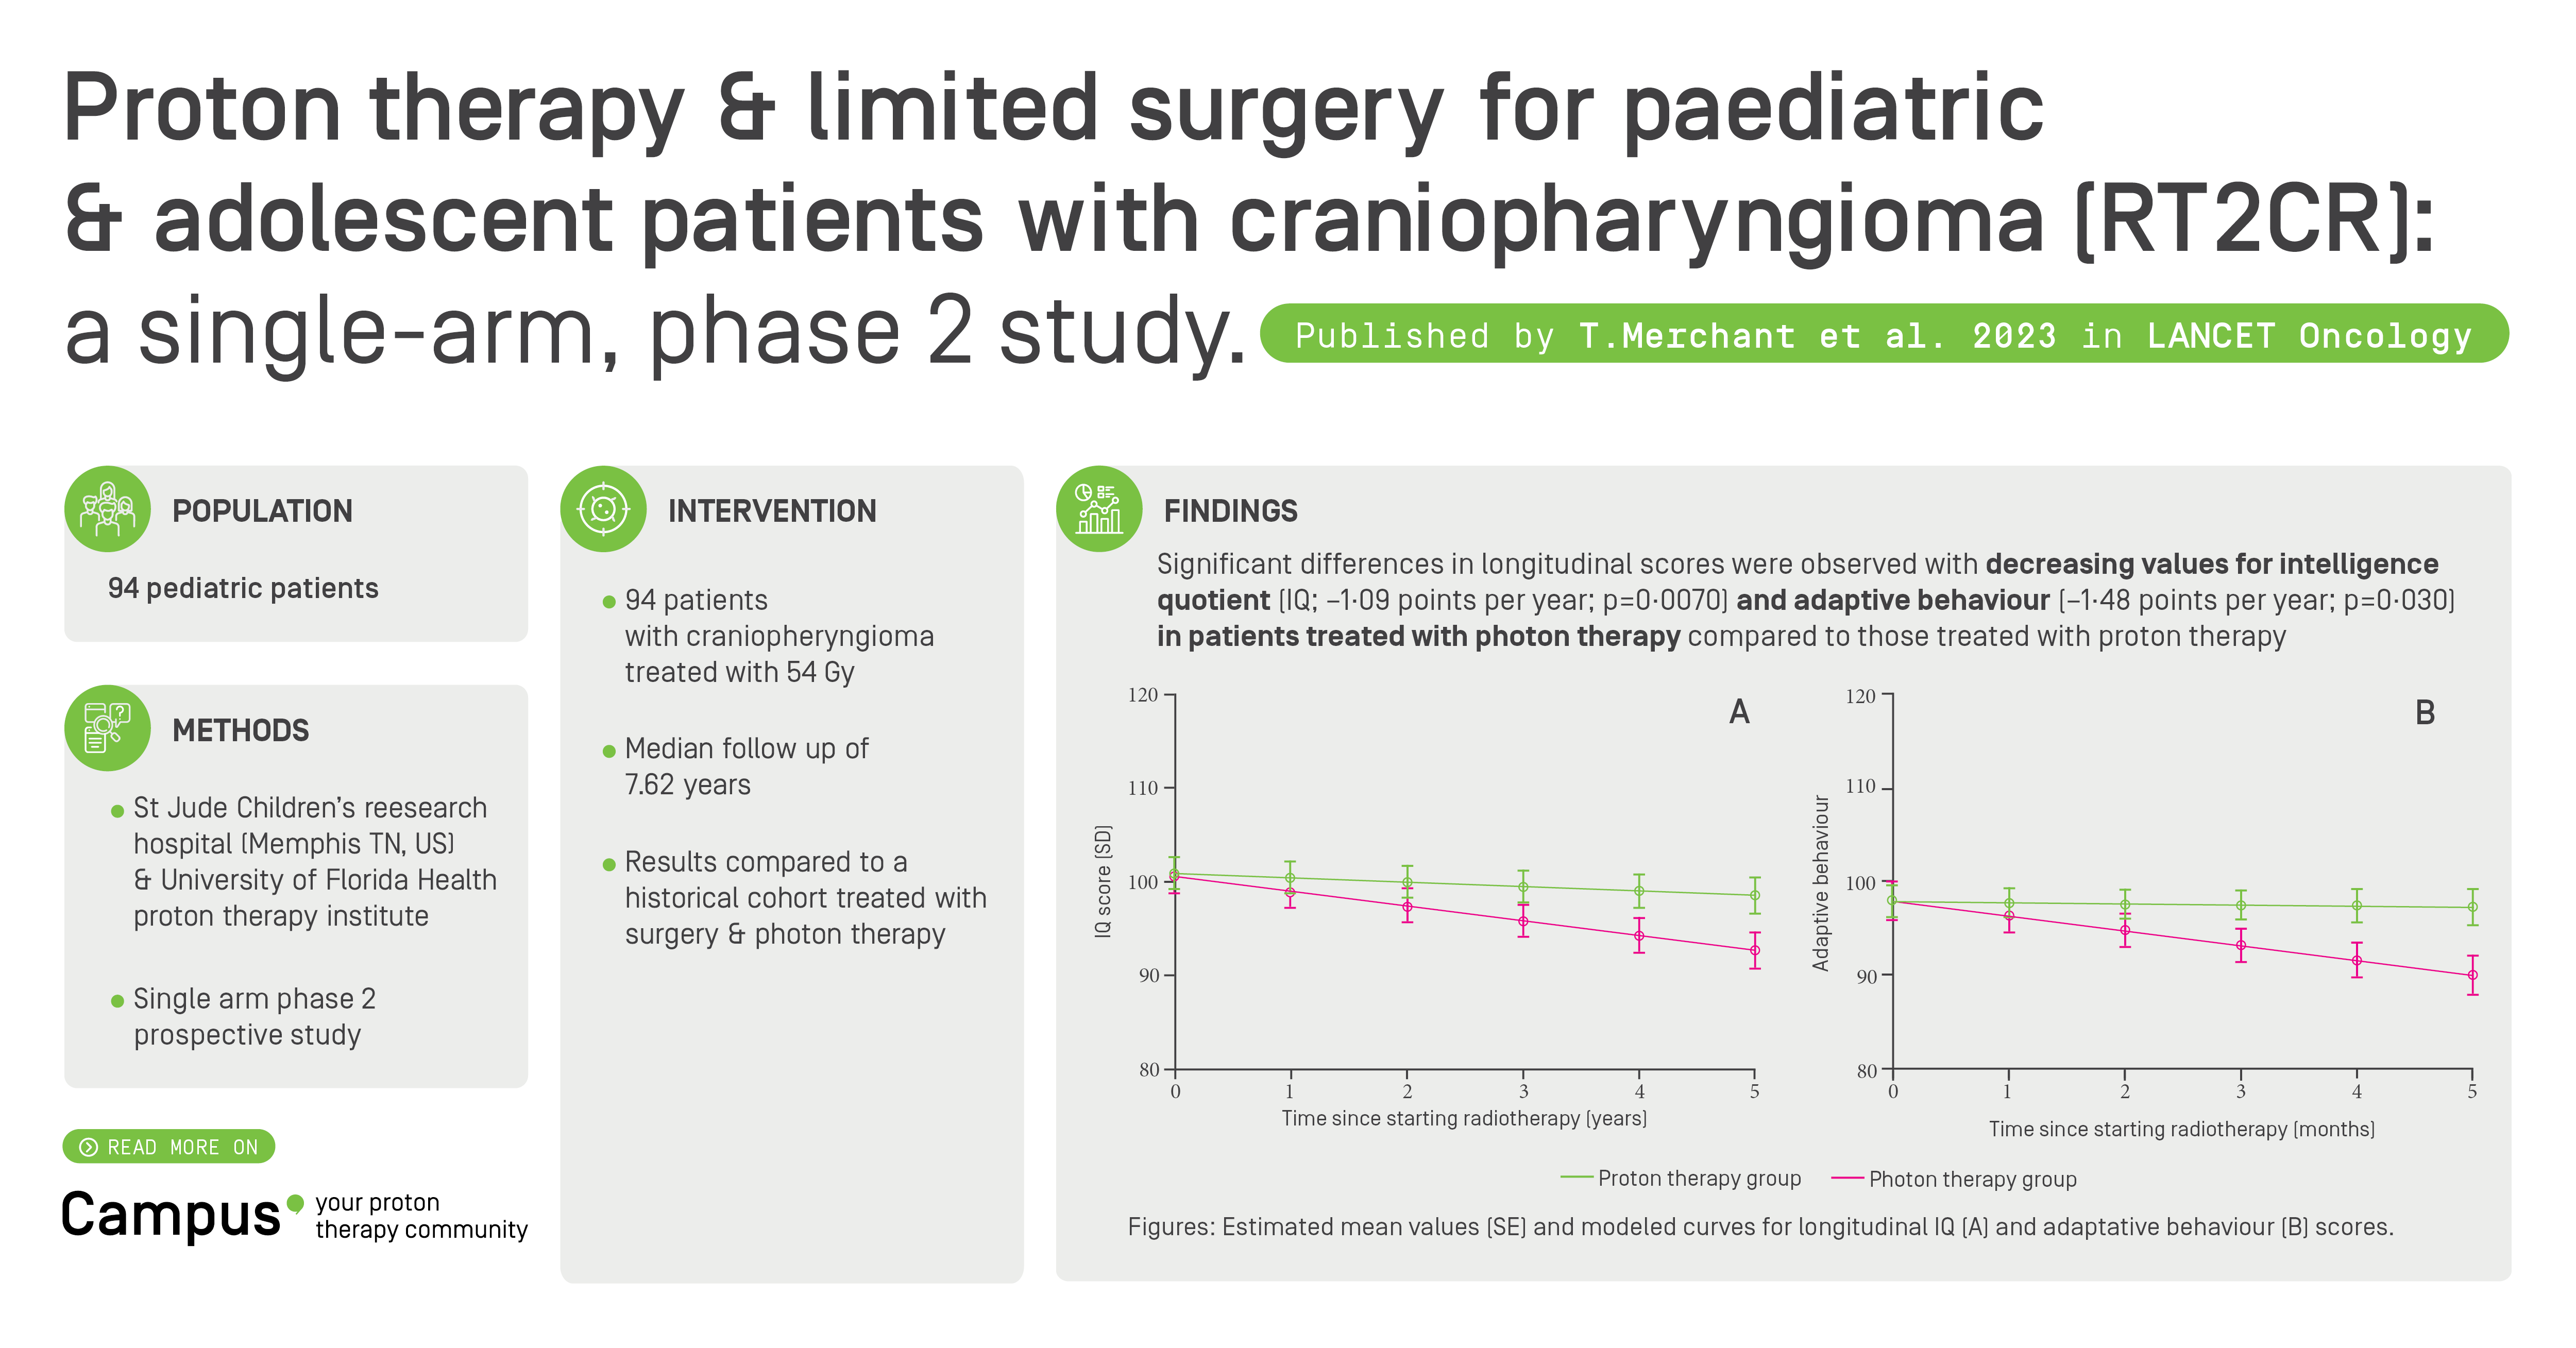 Proton therapy & limited surgery for paediatric  & adolescent patients with craniopharyngioma (RT2CR):